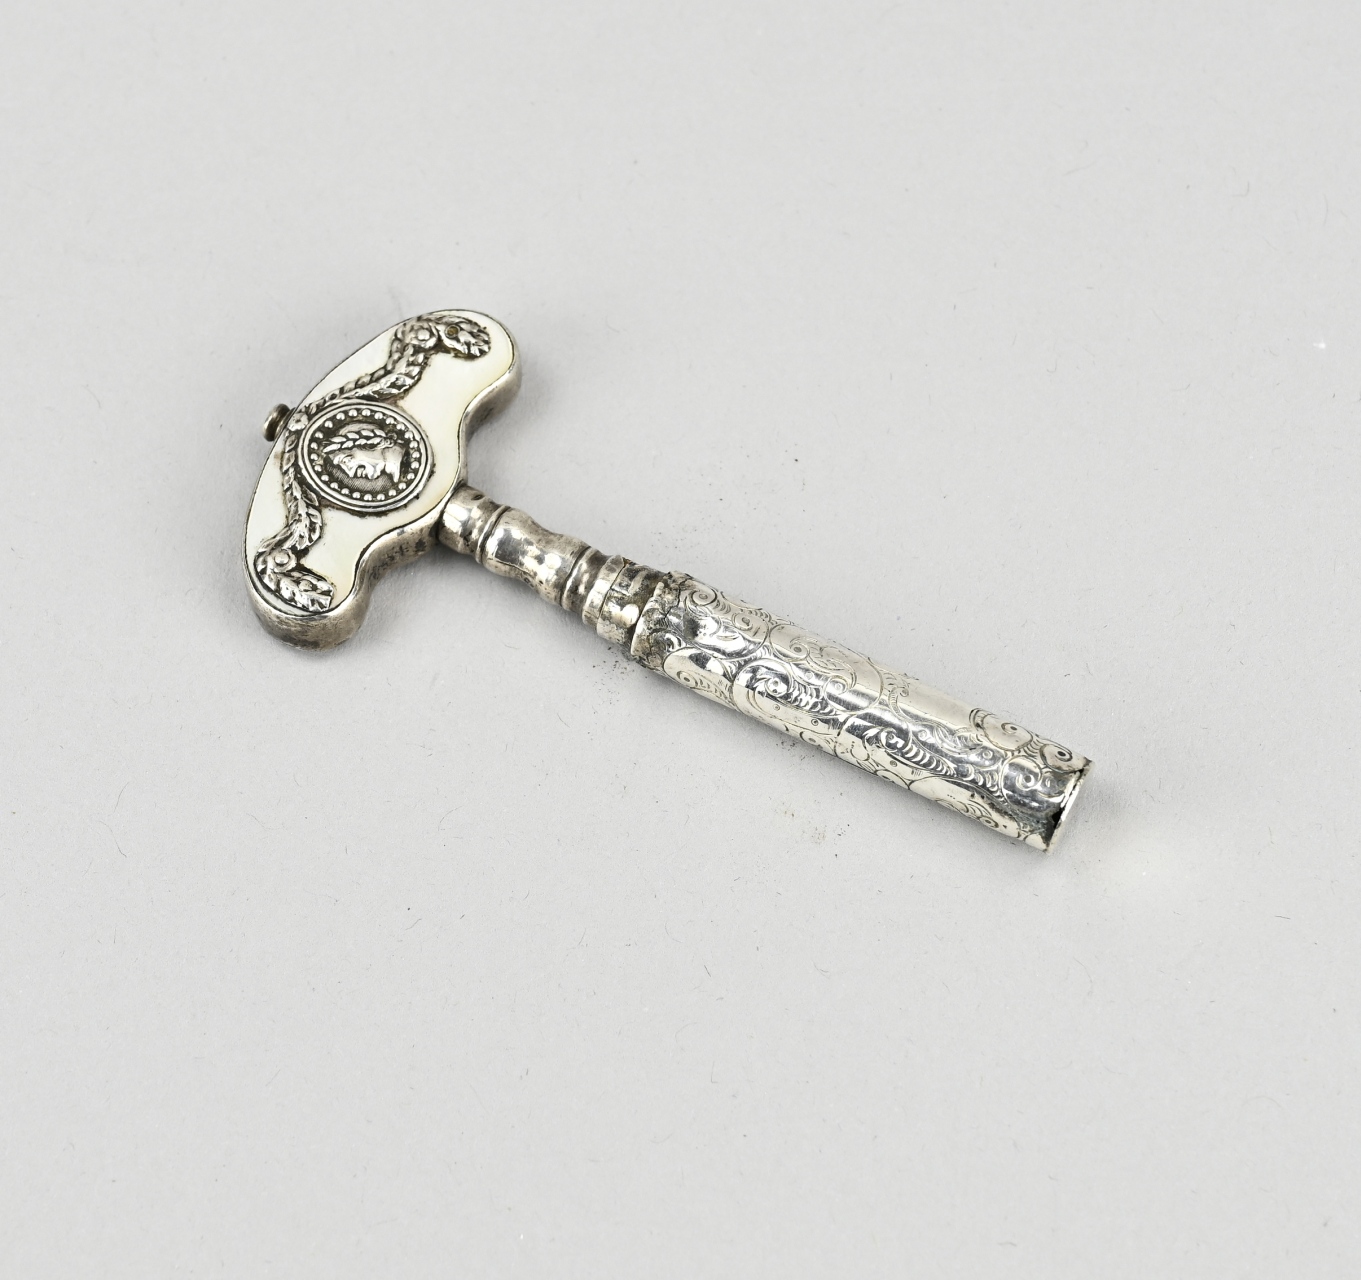 Silver corkscrew with sleeve - Image 2 of 2